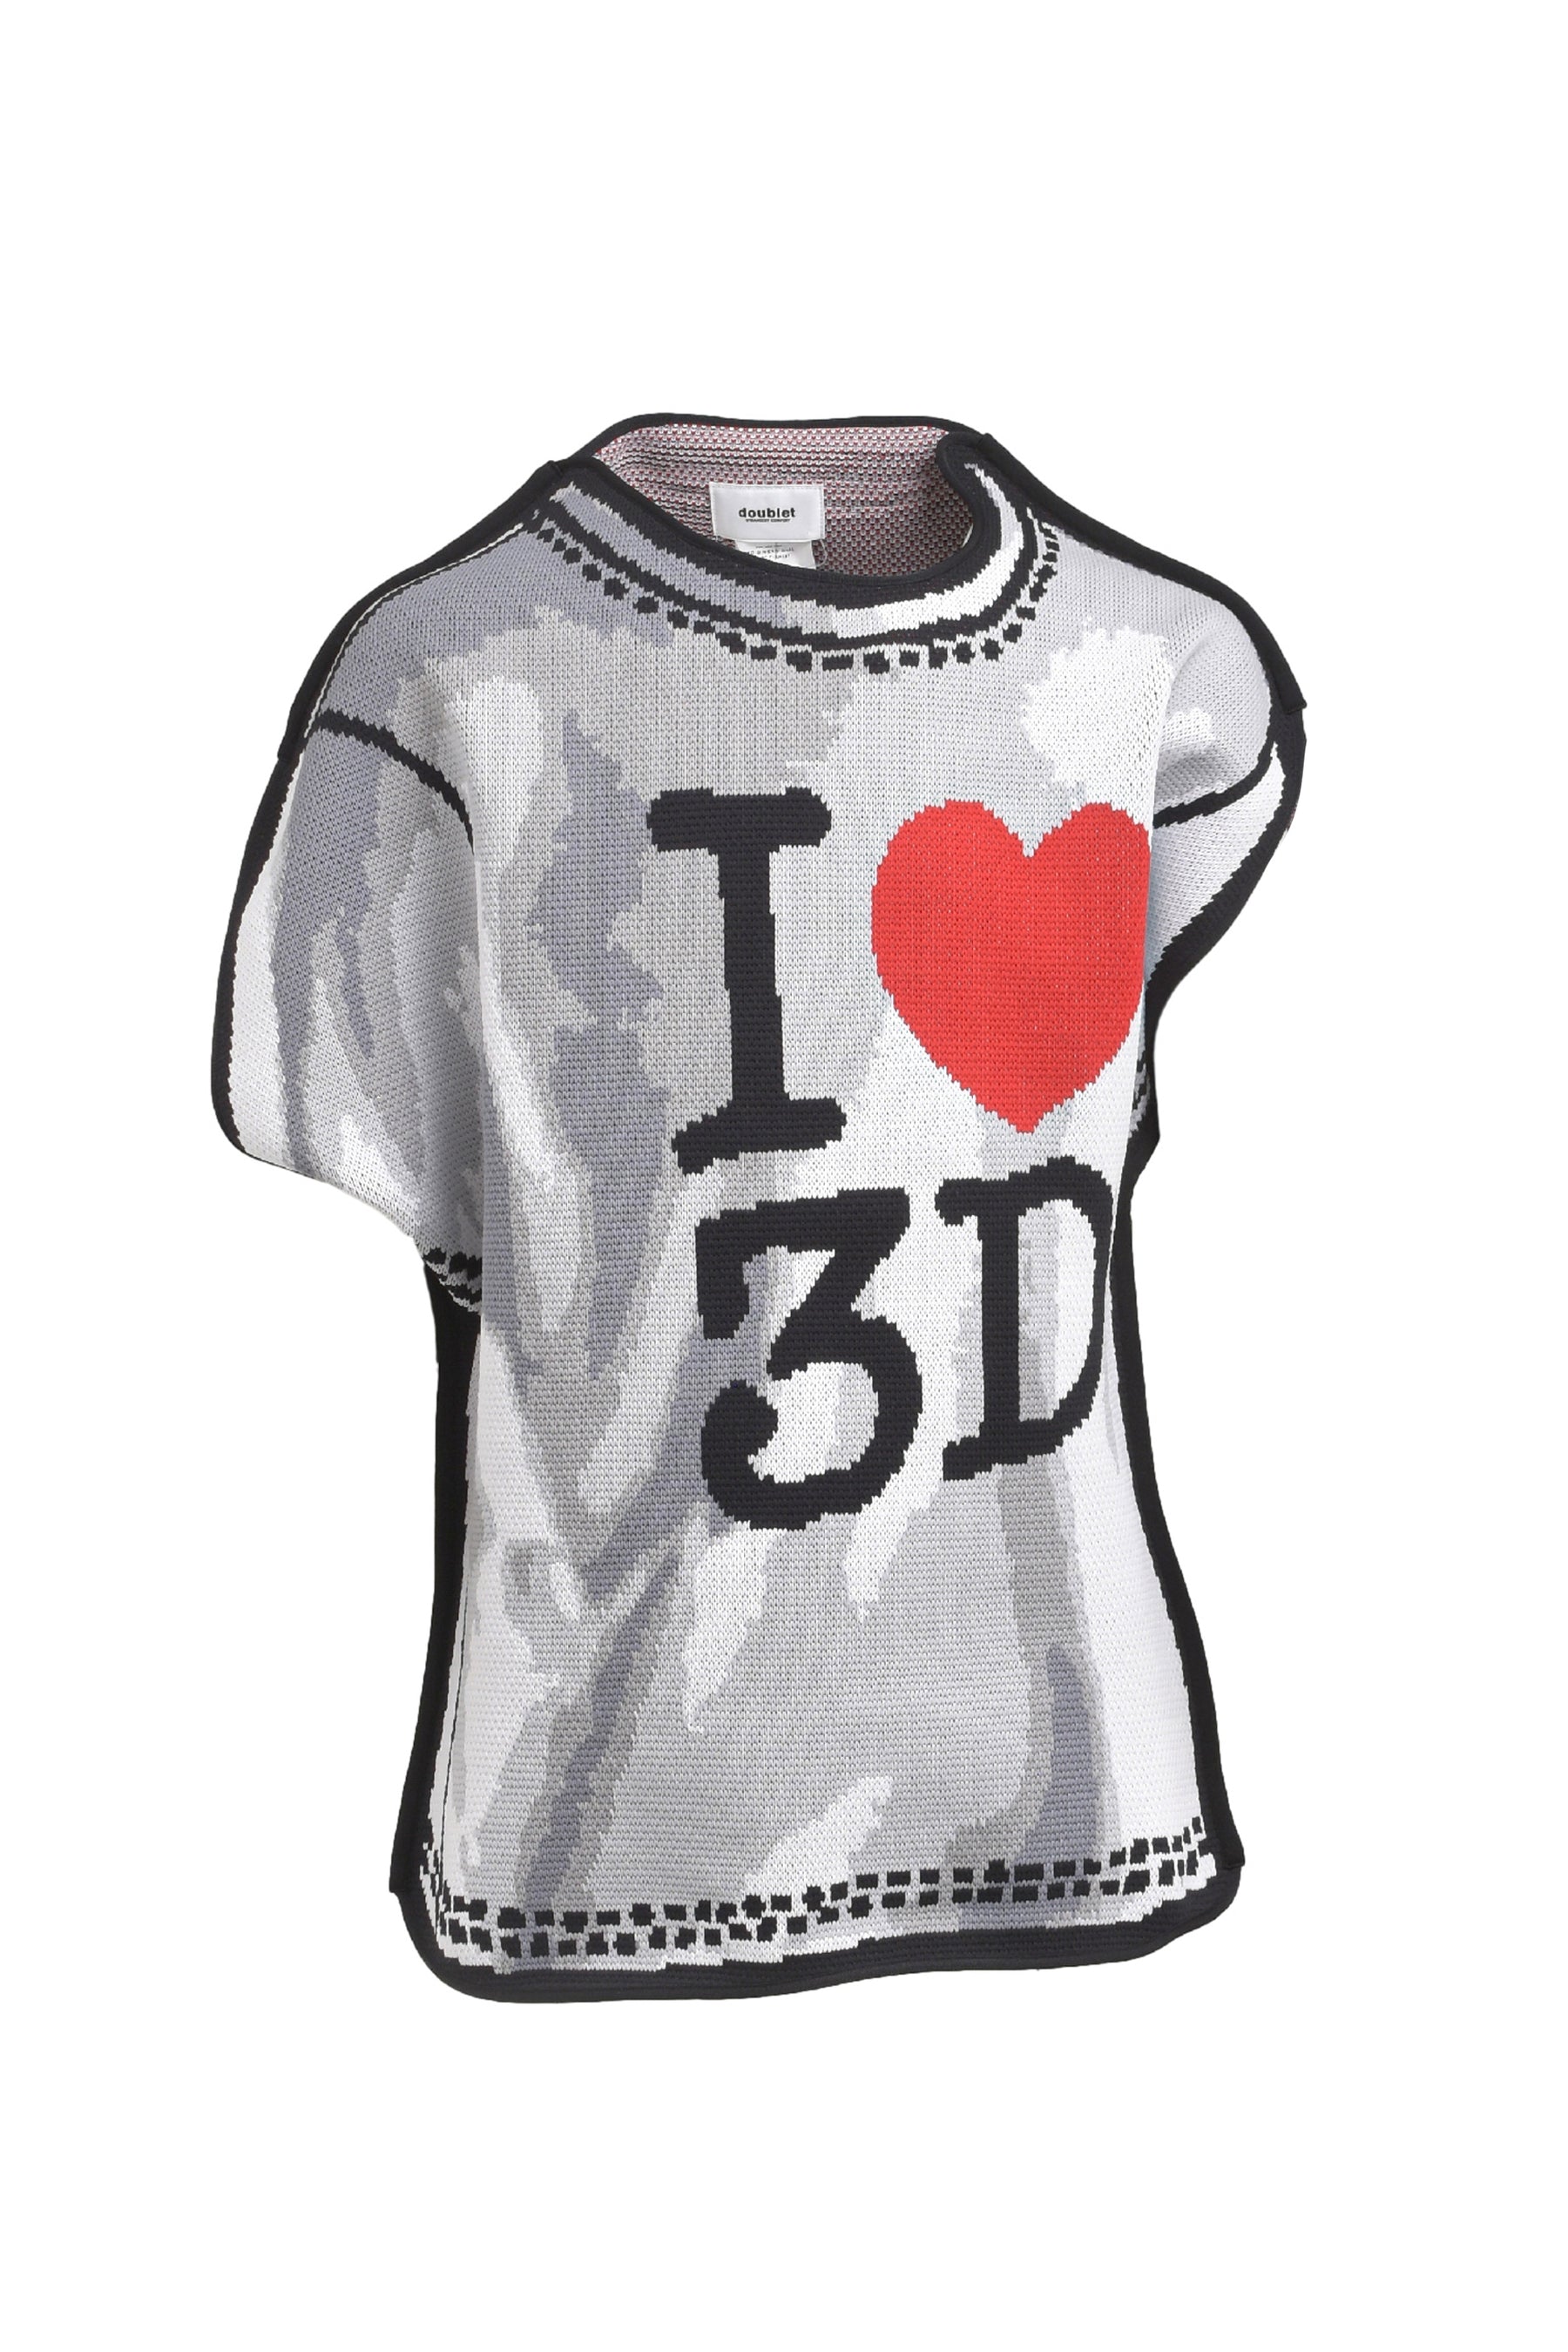 TWO-DIMENSIONAL "I 3D" T-SHIRT / WHT